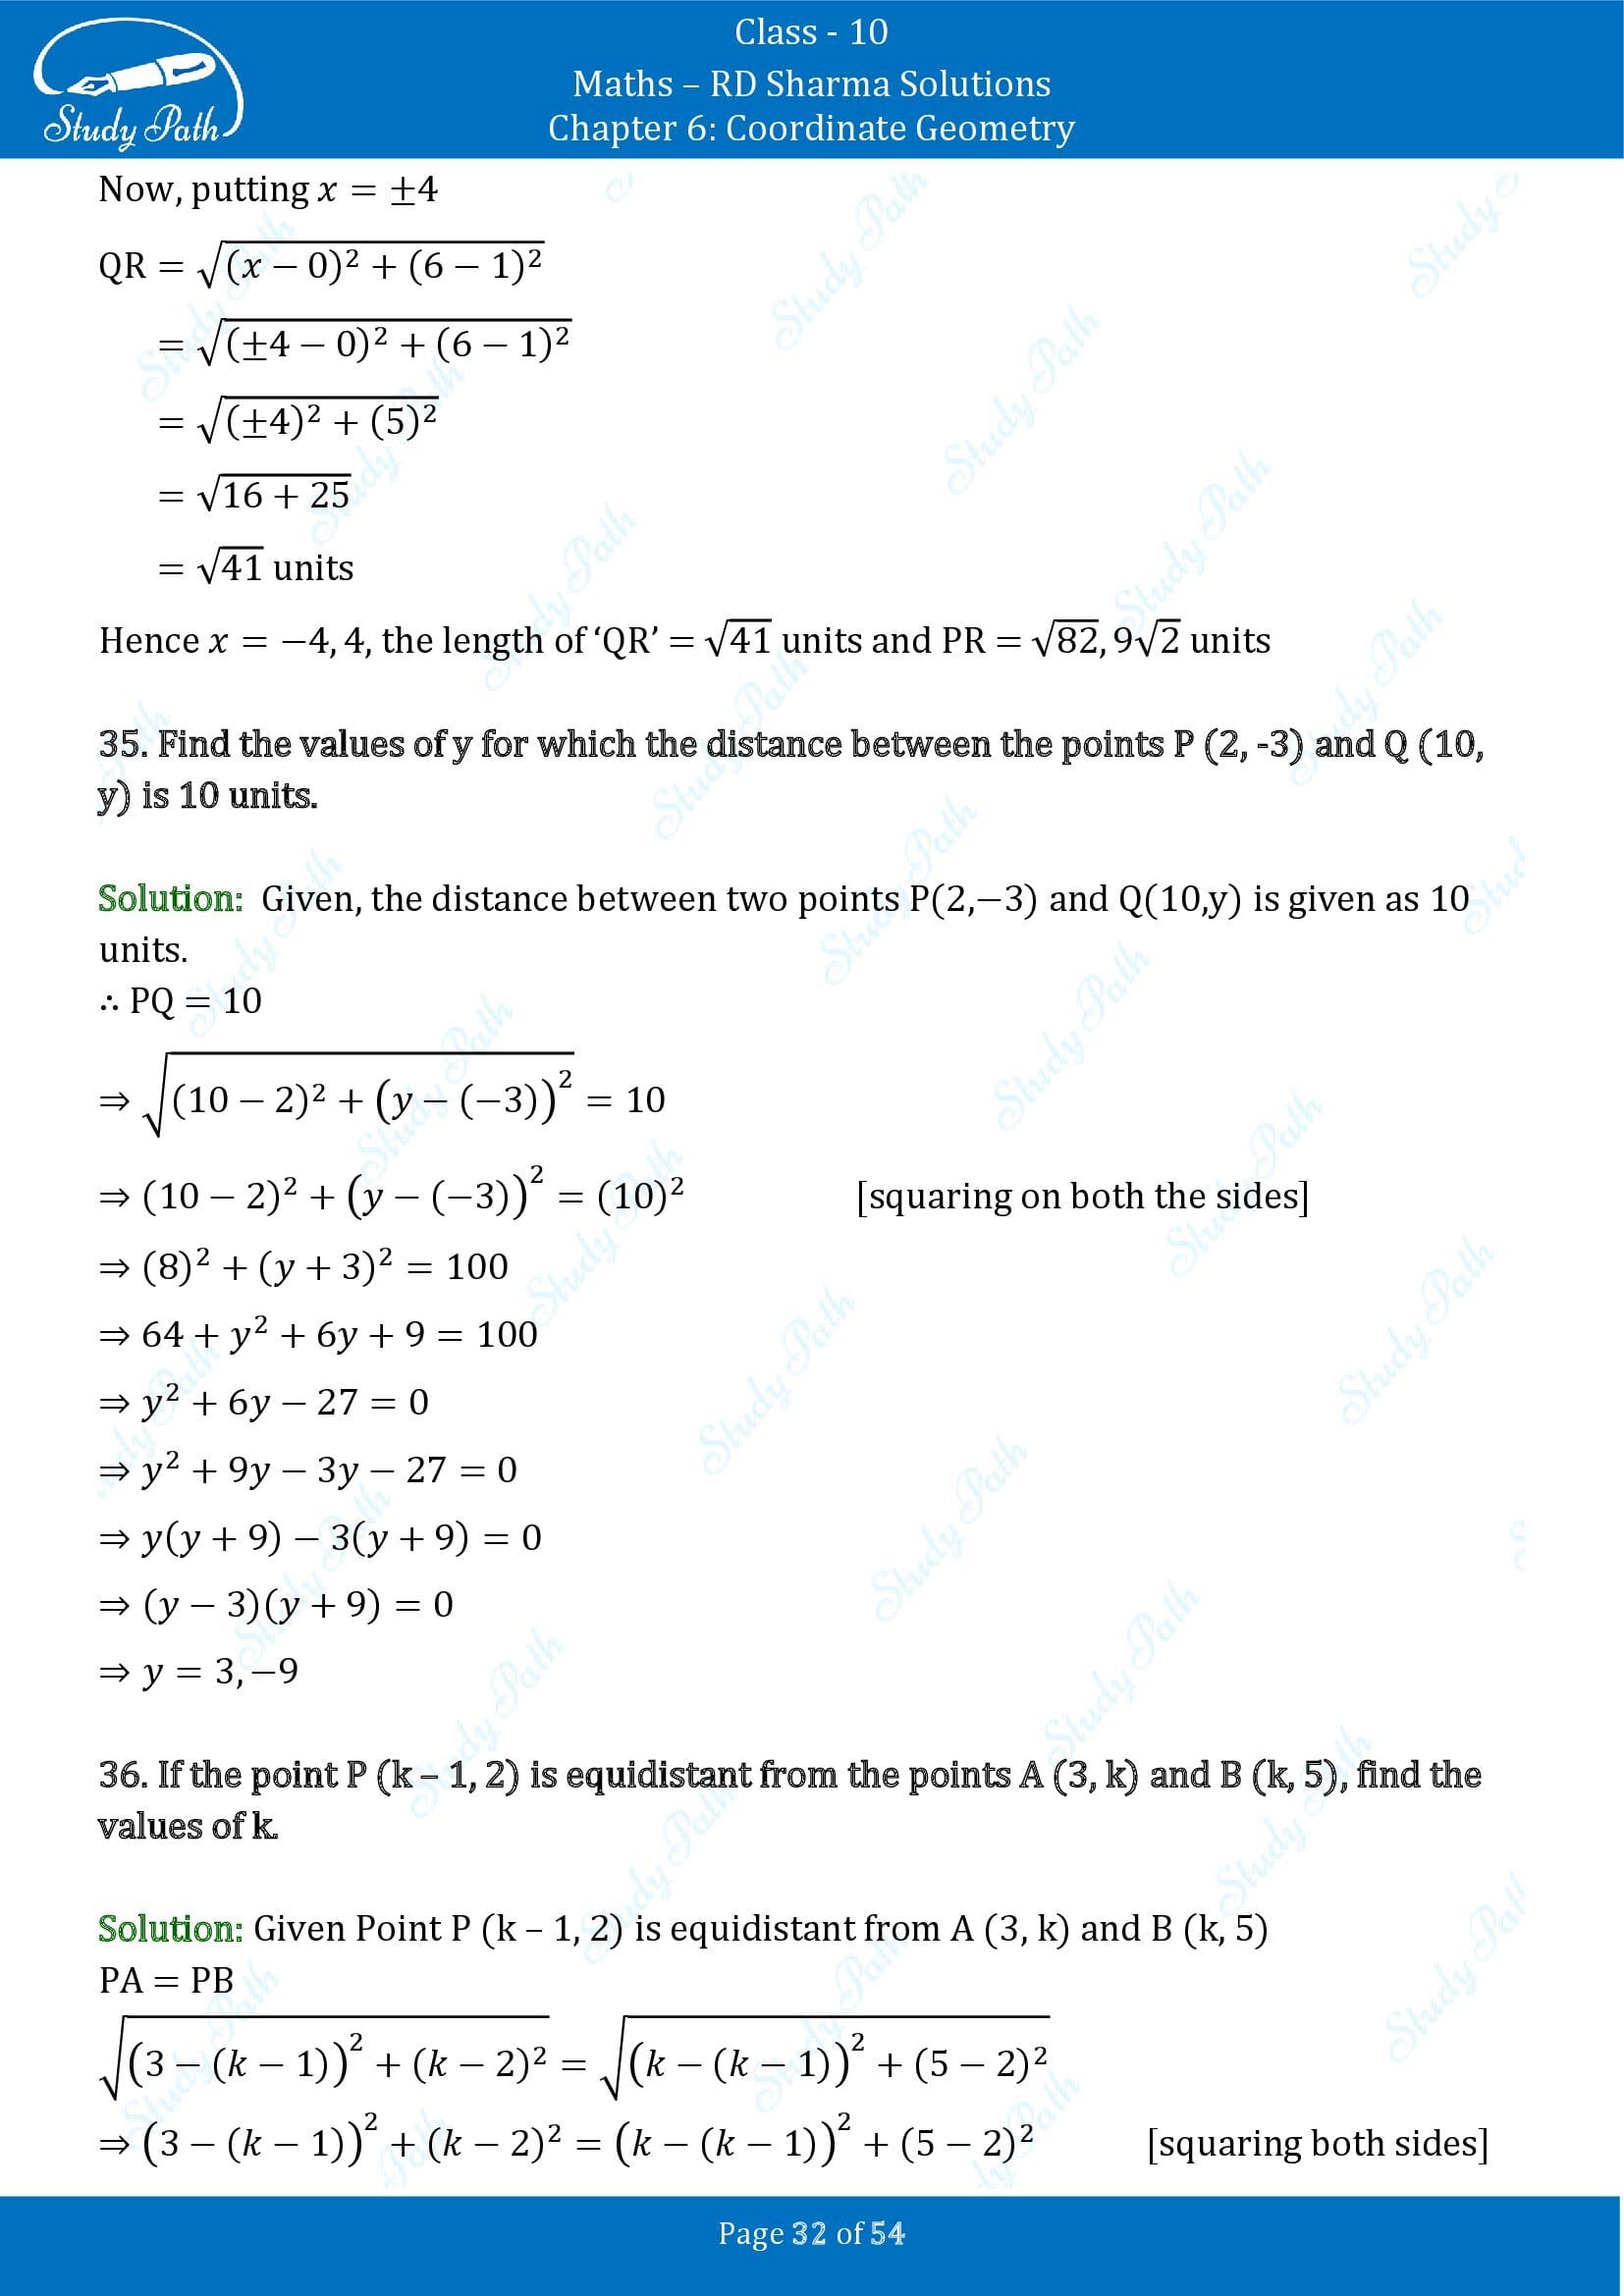 RD Sharma Solutions Class 10 Chapter 6 Coordinate Geometry Exercise 6.2 0032